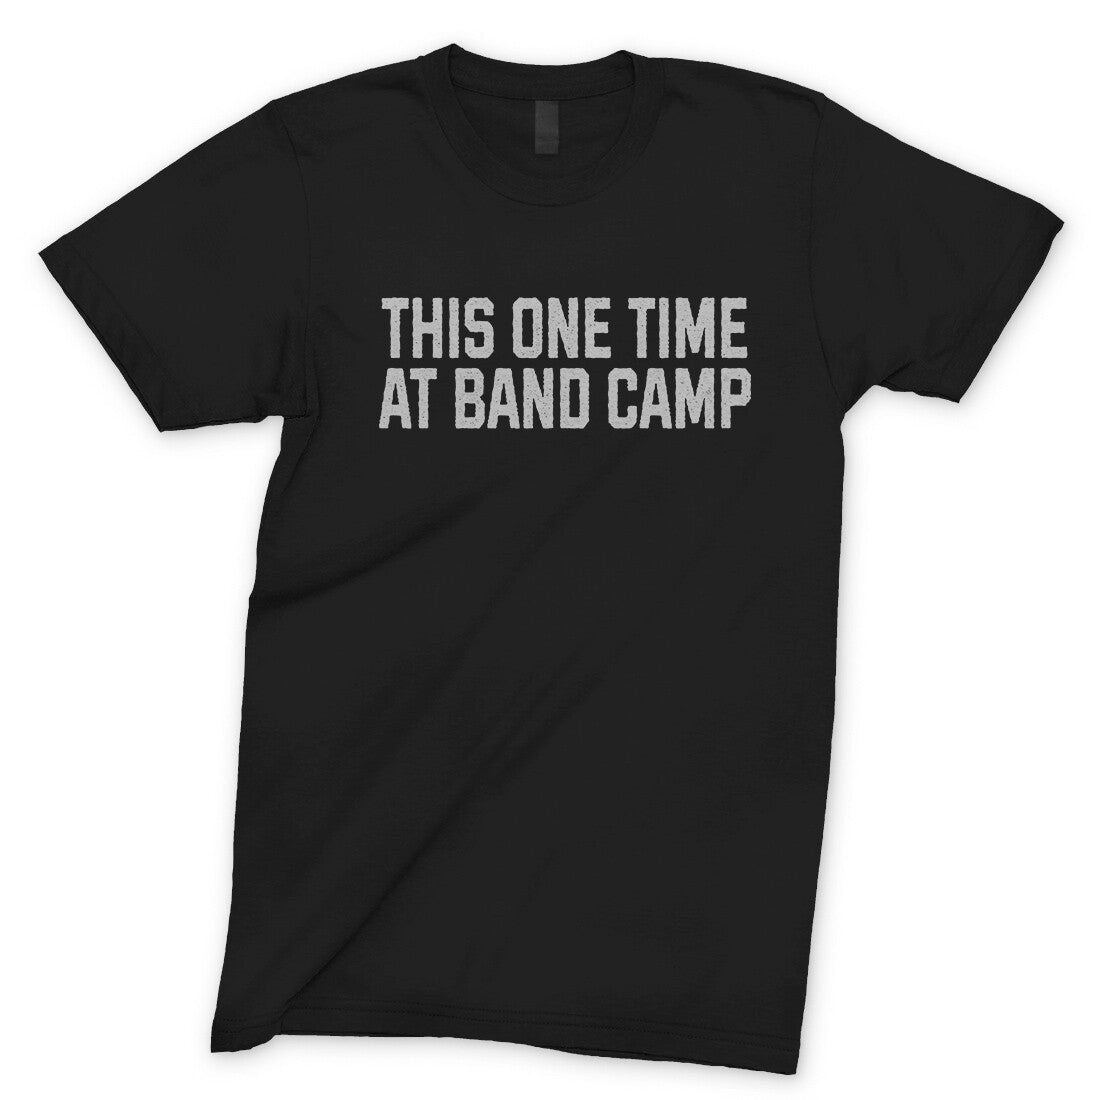 This One Time at Band Camp in Black Color